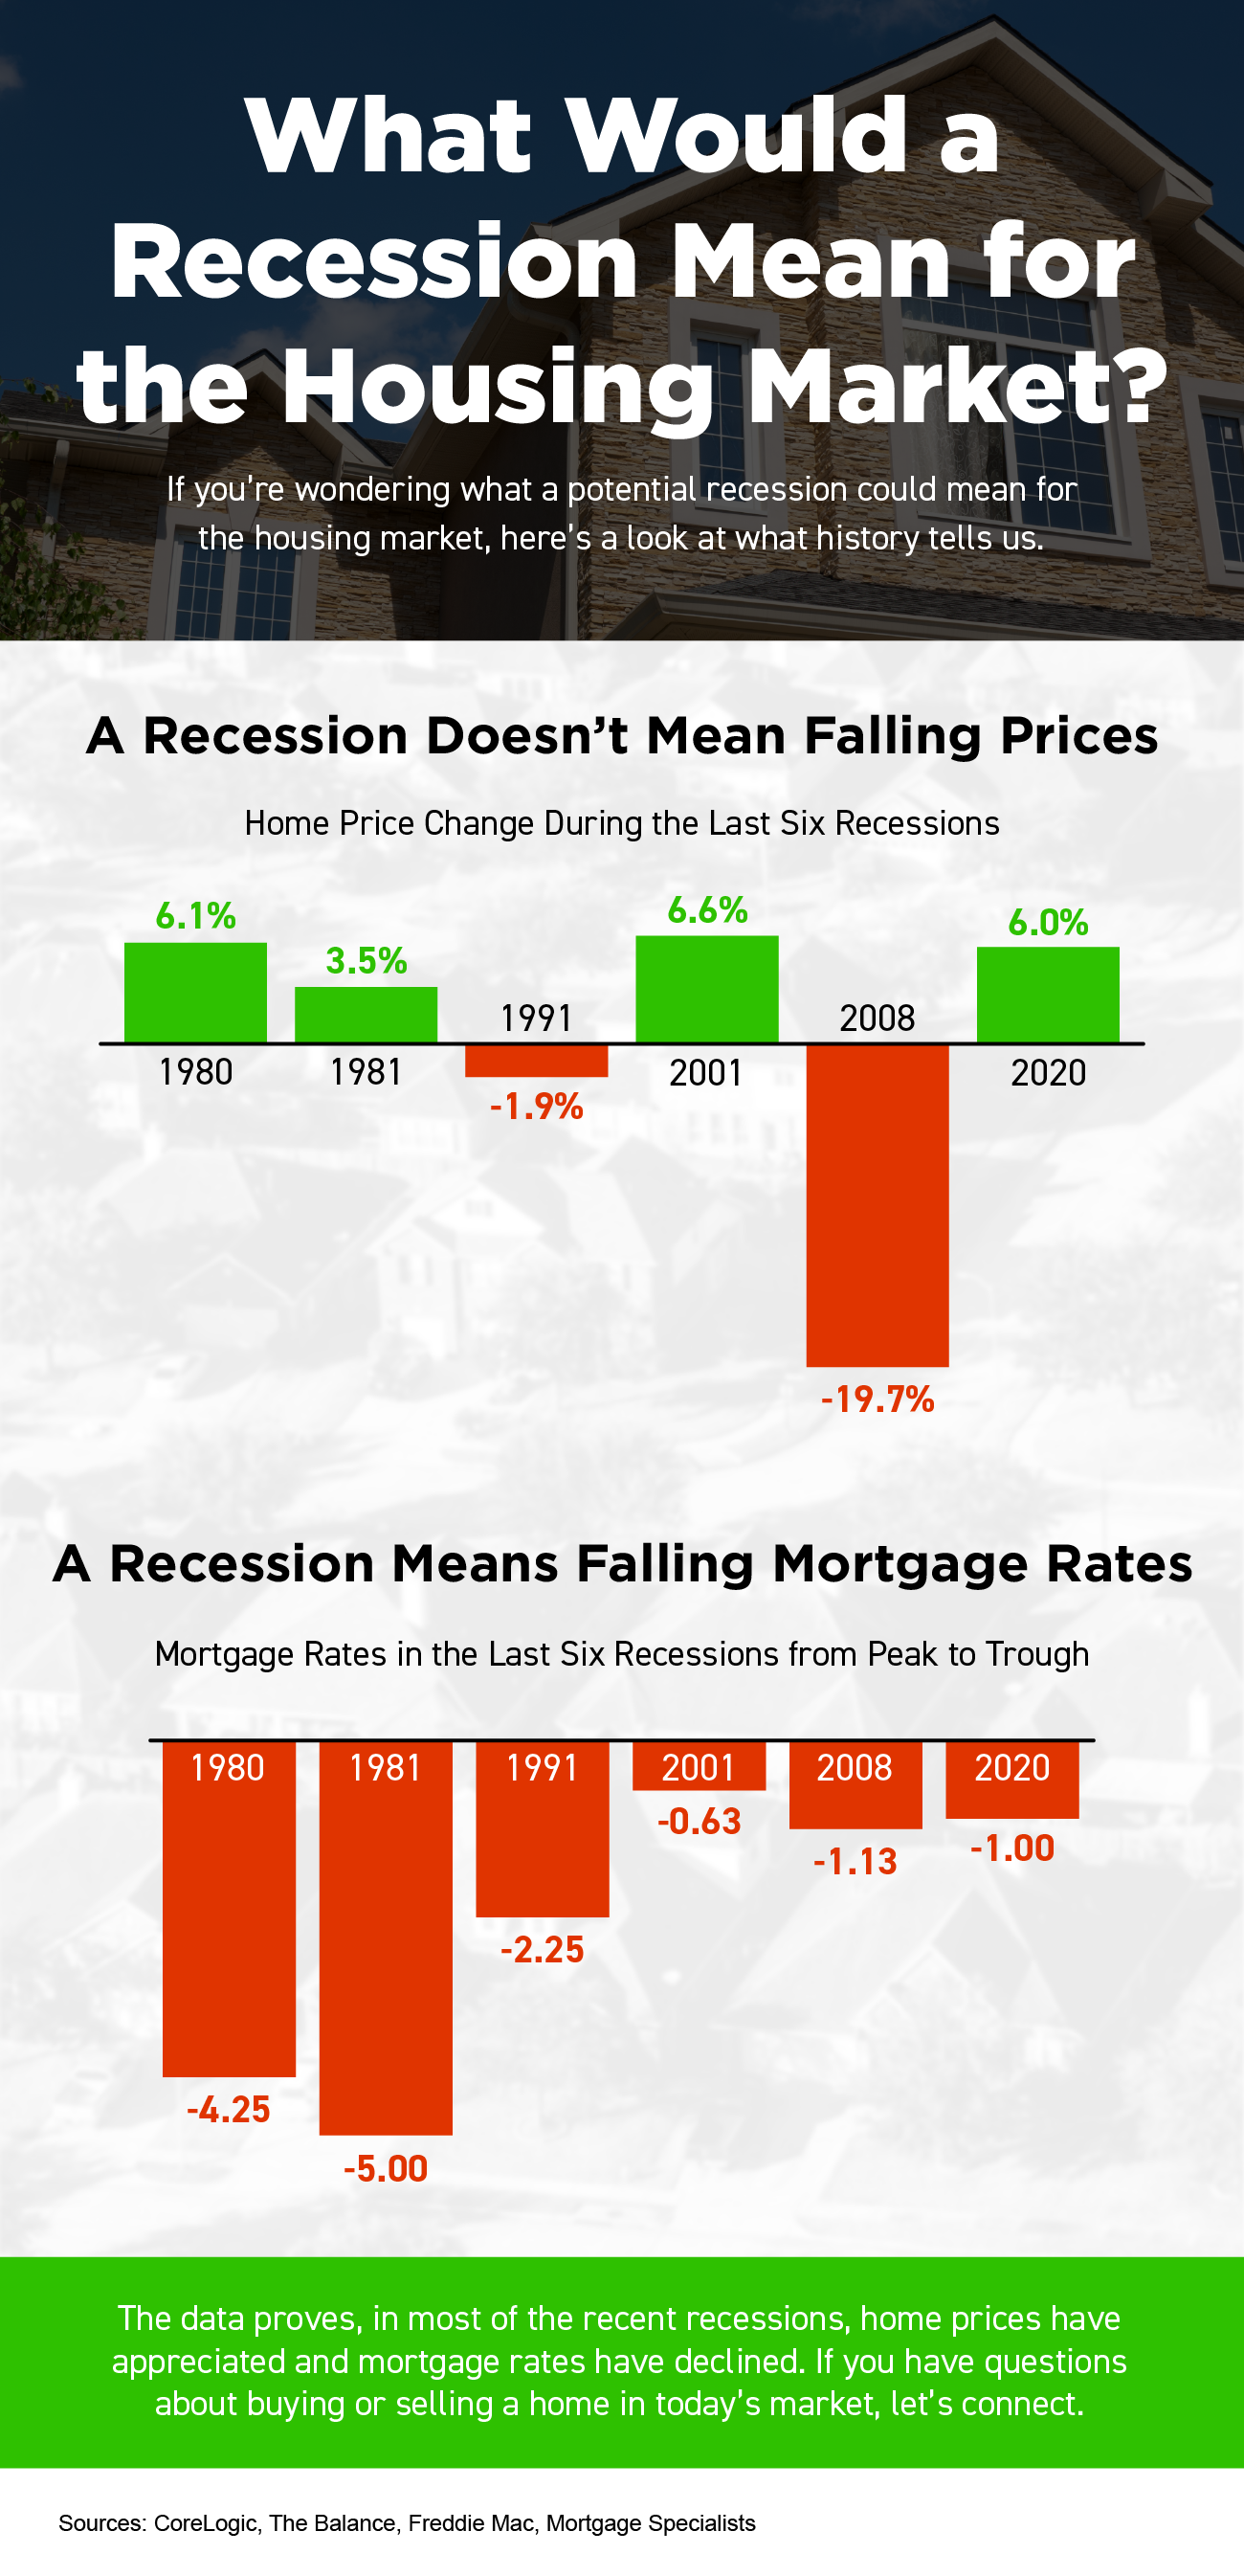 What Does a Recession Mean for the Housing Market? [INFOGRAPHIC]